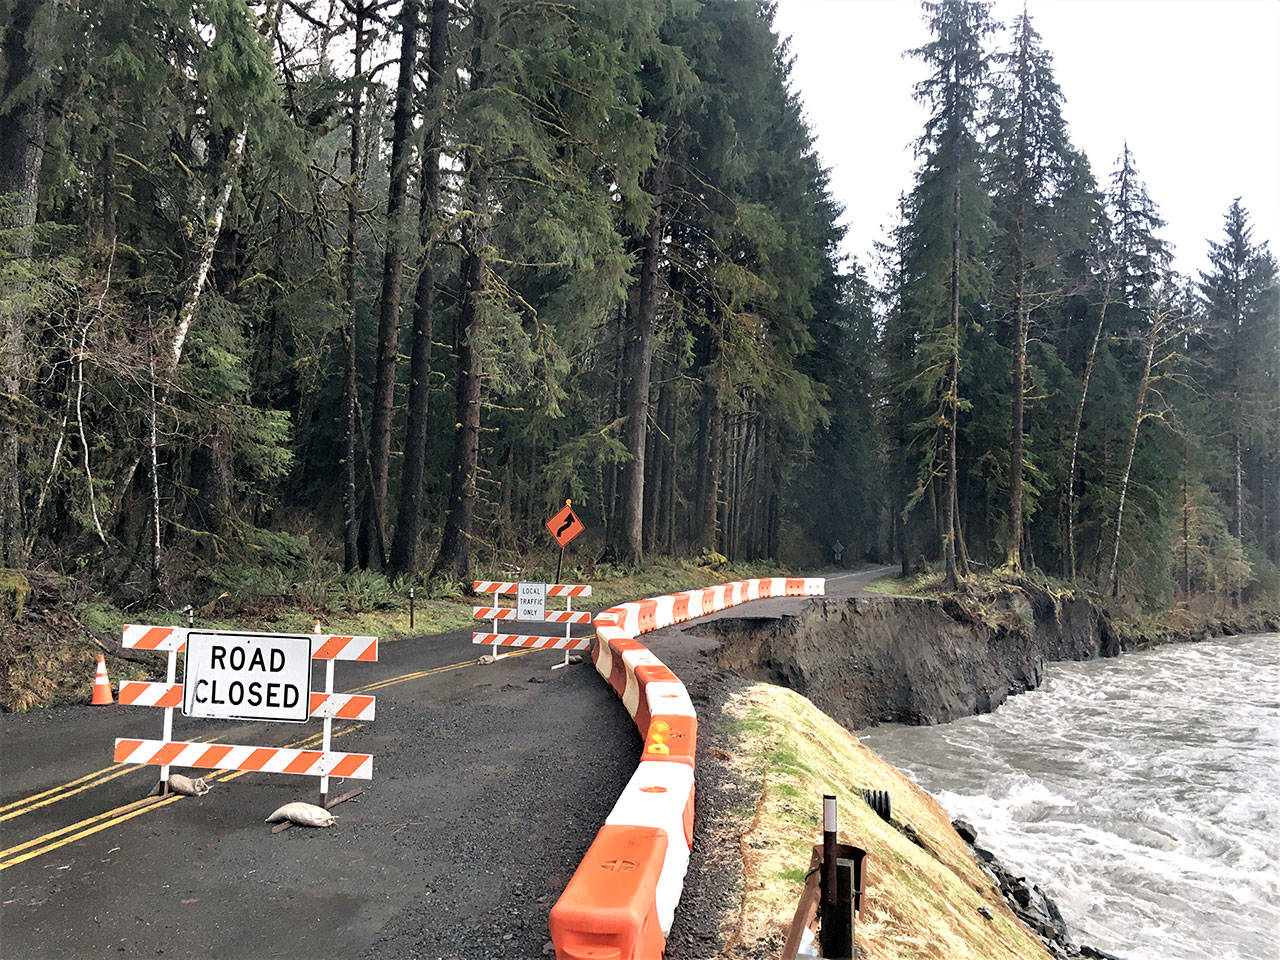 The Hoh Rain Forest area of Olympic National Park is temporarily closed until repairs are completed on Upper Hoh Road outside the park boundary. Jefferson County closed the Upper Hoh Road to through traffic today due to the washout at milepost 8. (National Park Service)